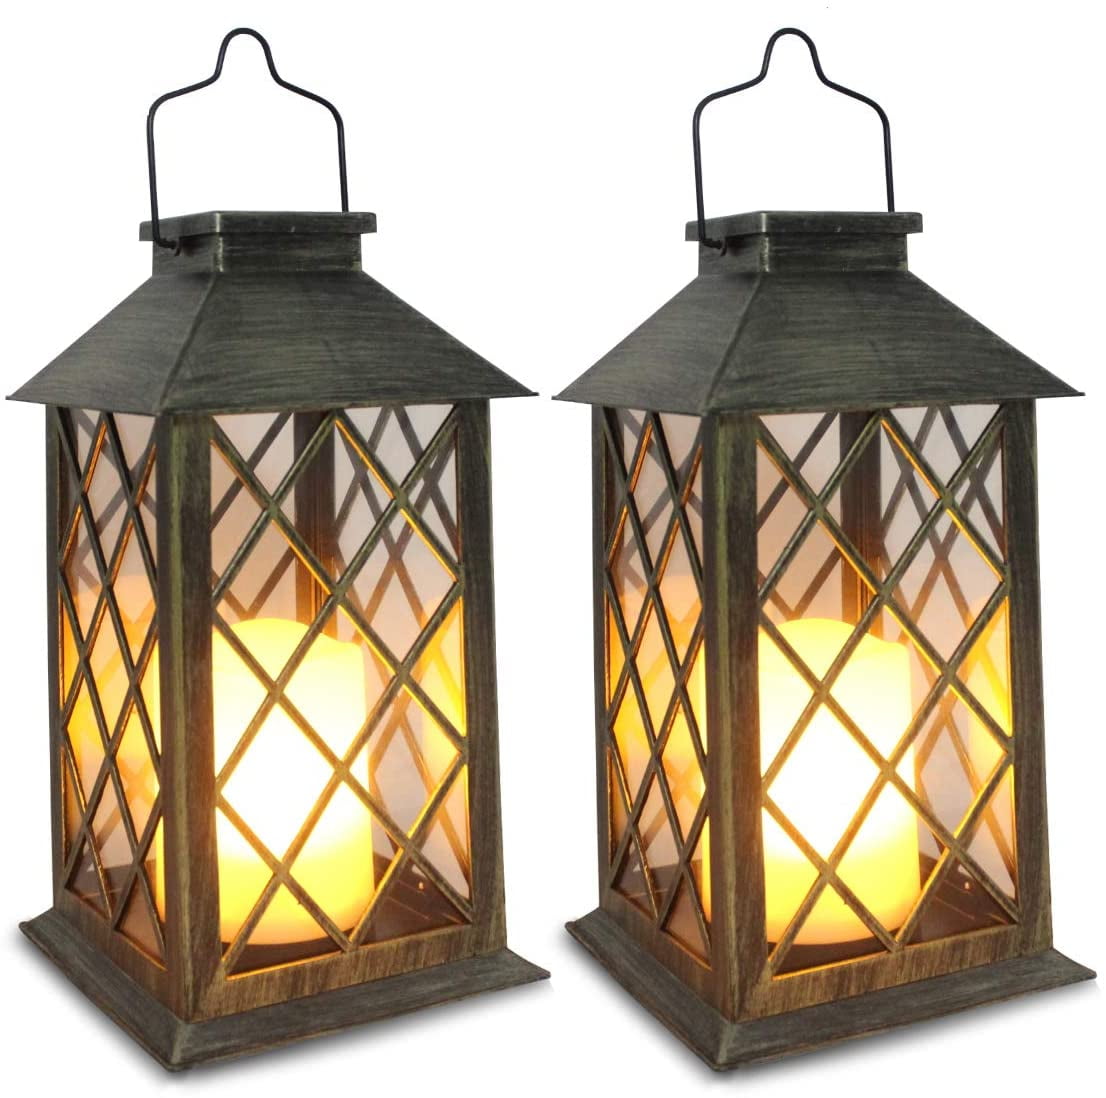 2 x Metal Garden Outdoor Lanterns with Flickering LED Battery Candle Great Value